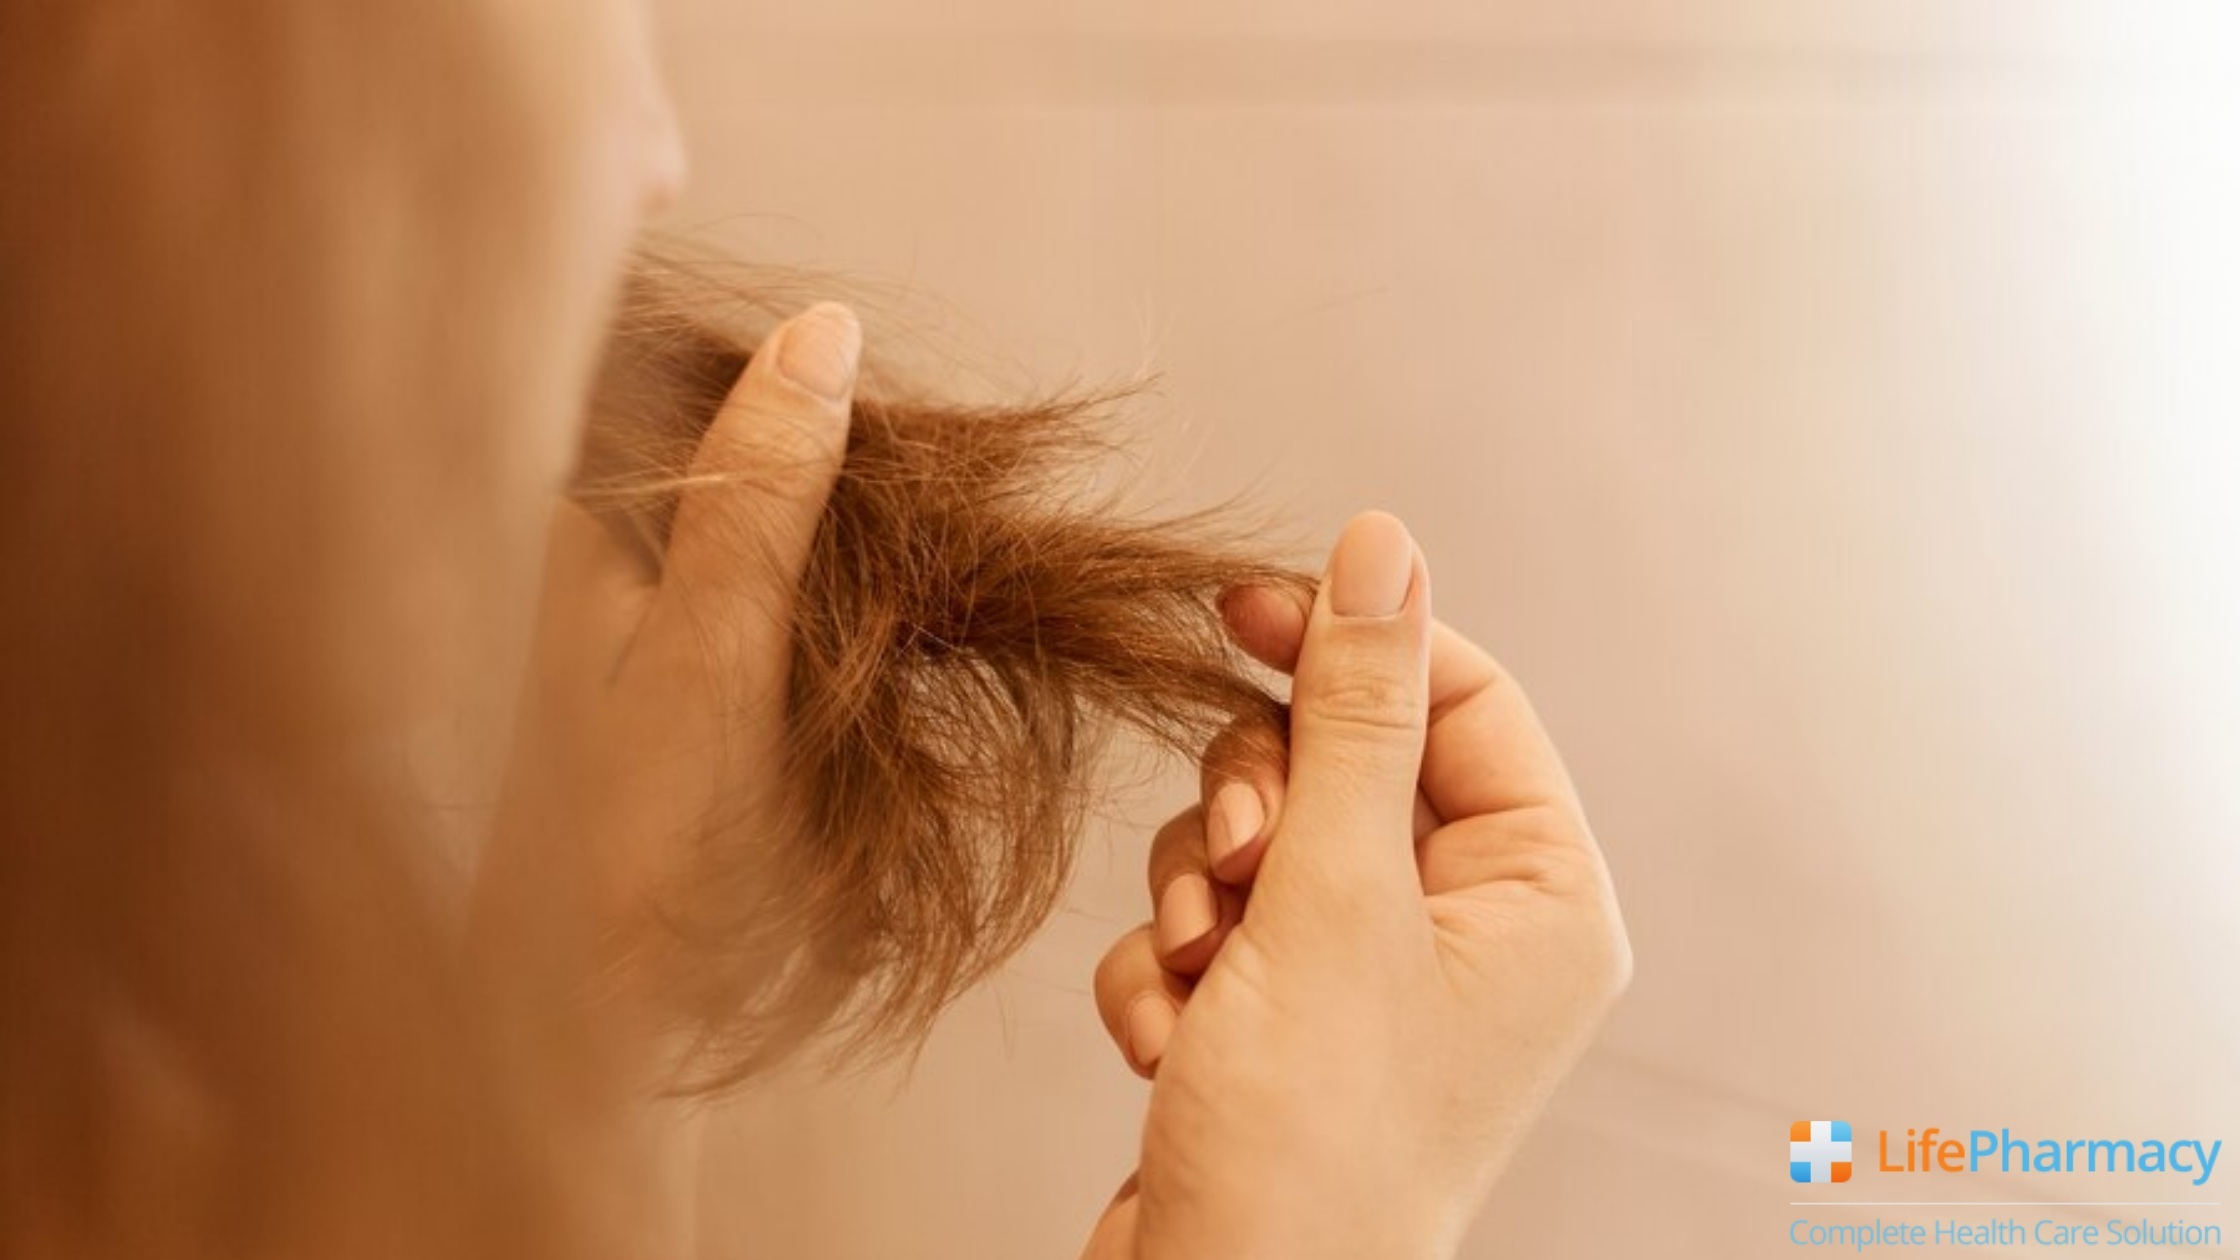 Complete Guide: How to Maintain Hair Growth After 50